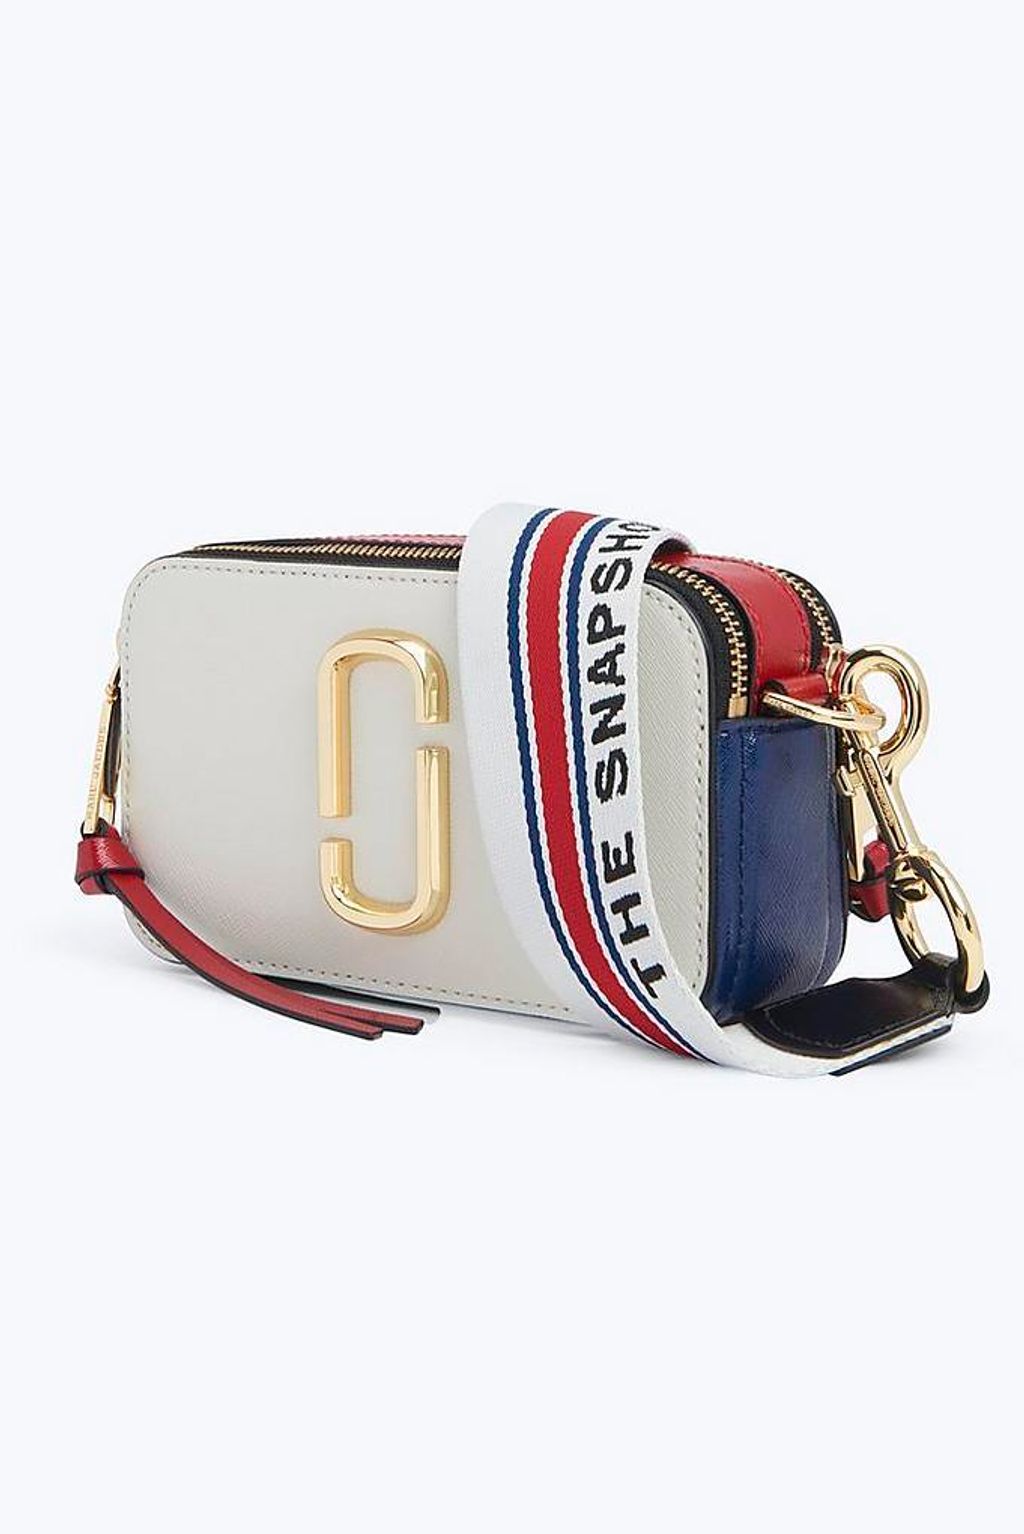 Marc Jacobs The Snapshot Small Camera Bag- Misty Blue Multi